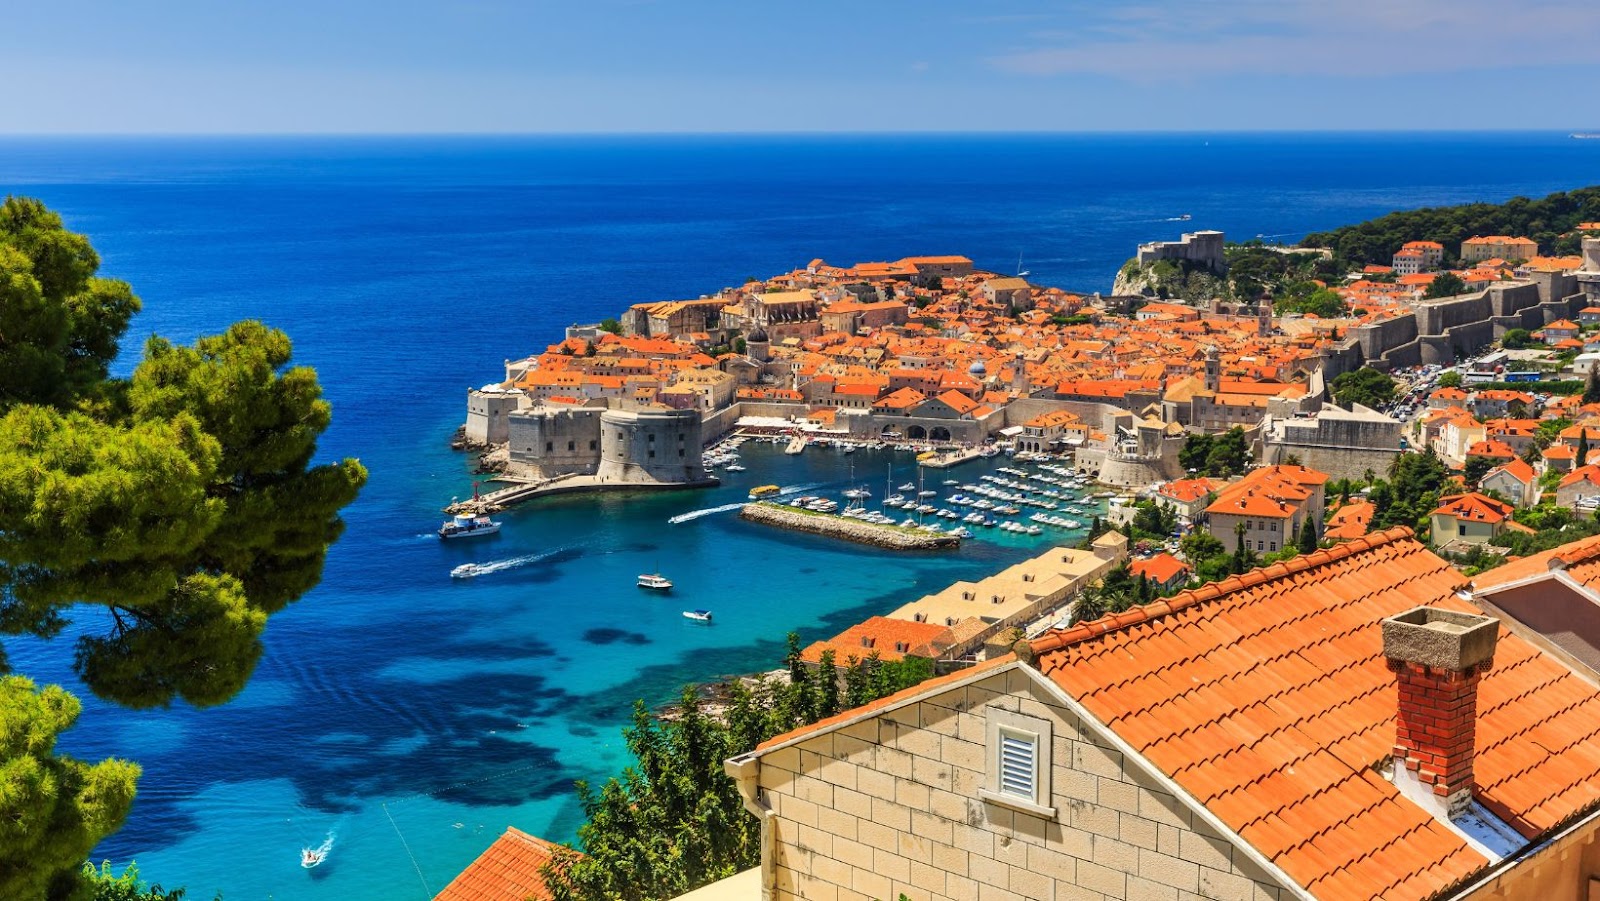 Which Countries Should You Visit If You Want to Experience the Adriatic Sea?